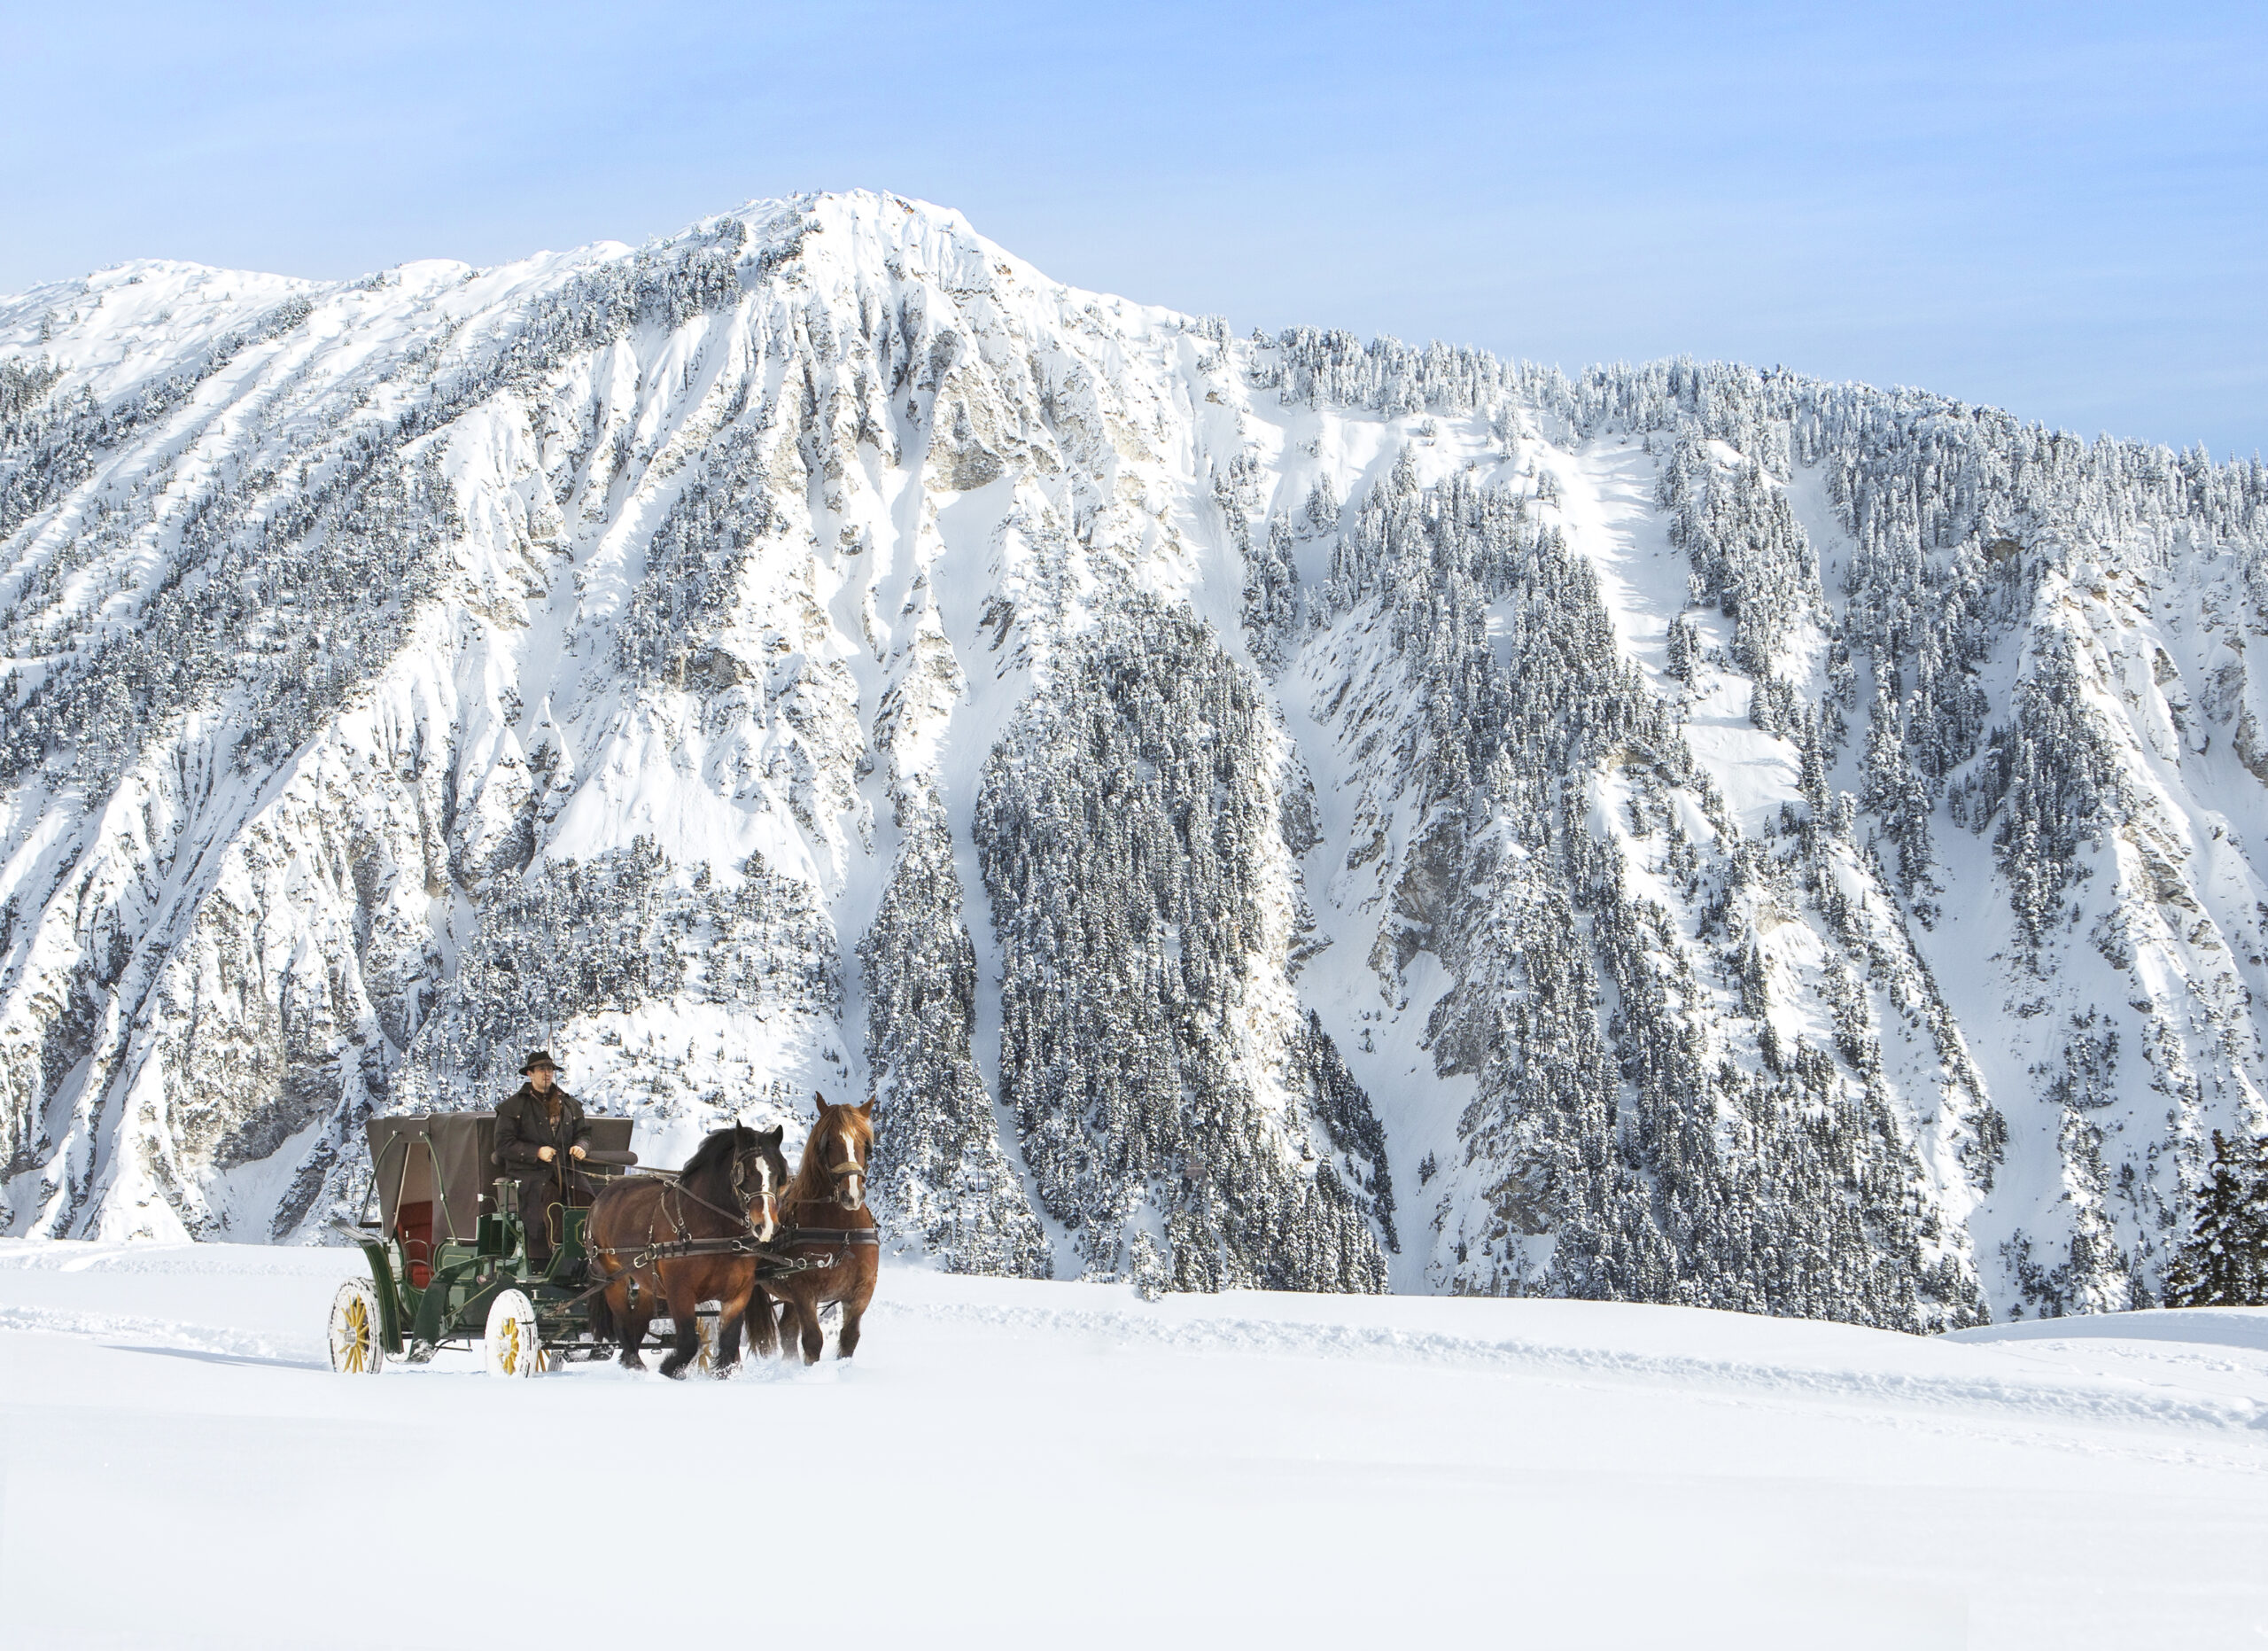 Take in the sights from a horse-drawn carriage ride